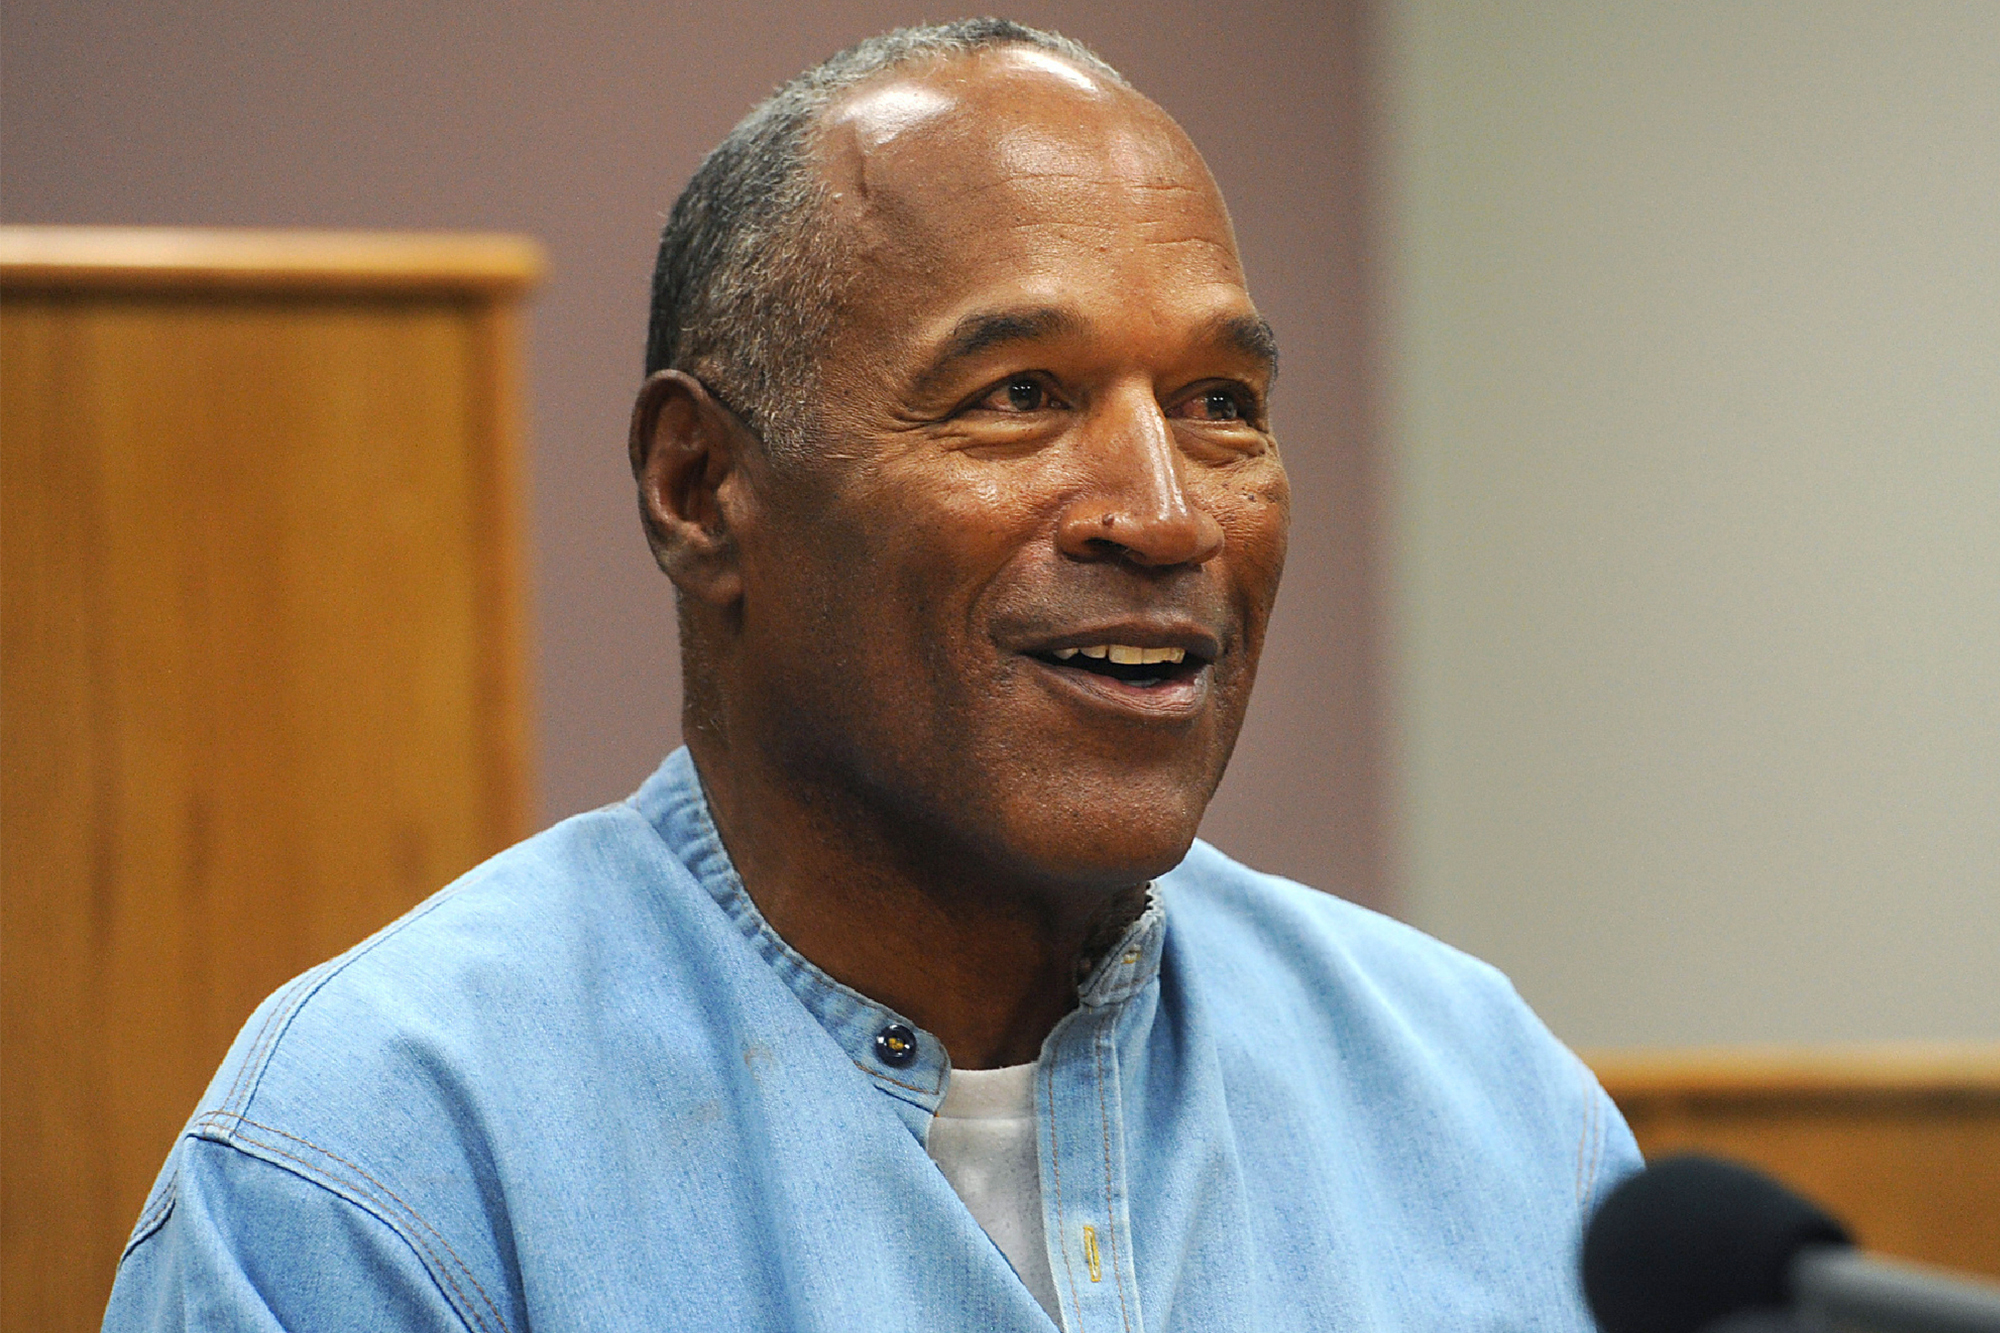 Uncovering The Truth: Who Is OJ Simpson And What Did He Do?